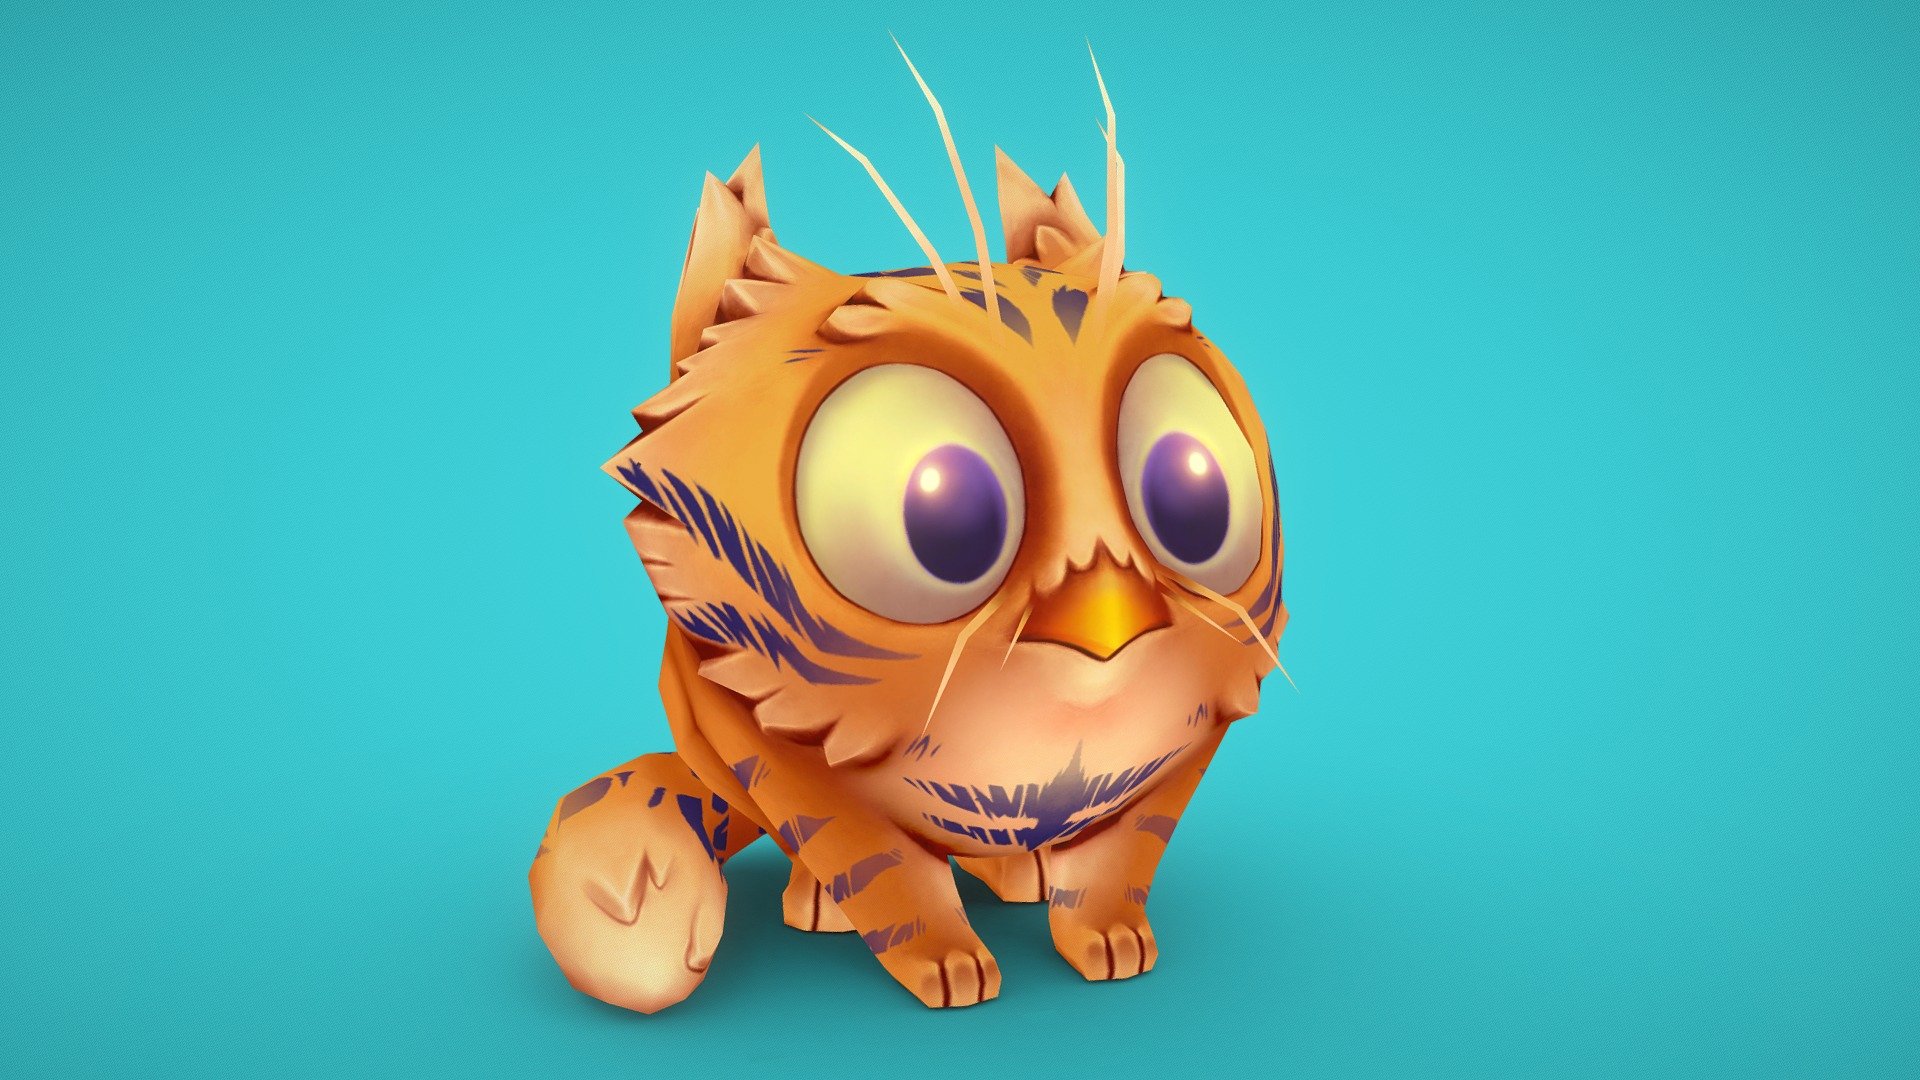 Recently I had an awesome opportunity to make this cute little guy as an art assignment &lt;3 - Cute Stylized Owlcat - 3D model by Paula Zed (@paula_zed) 3d model